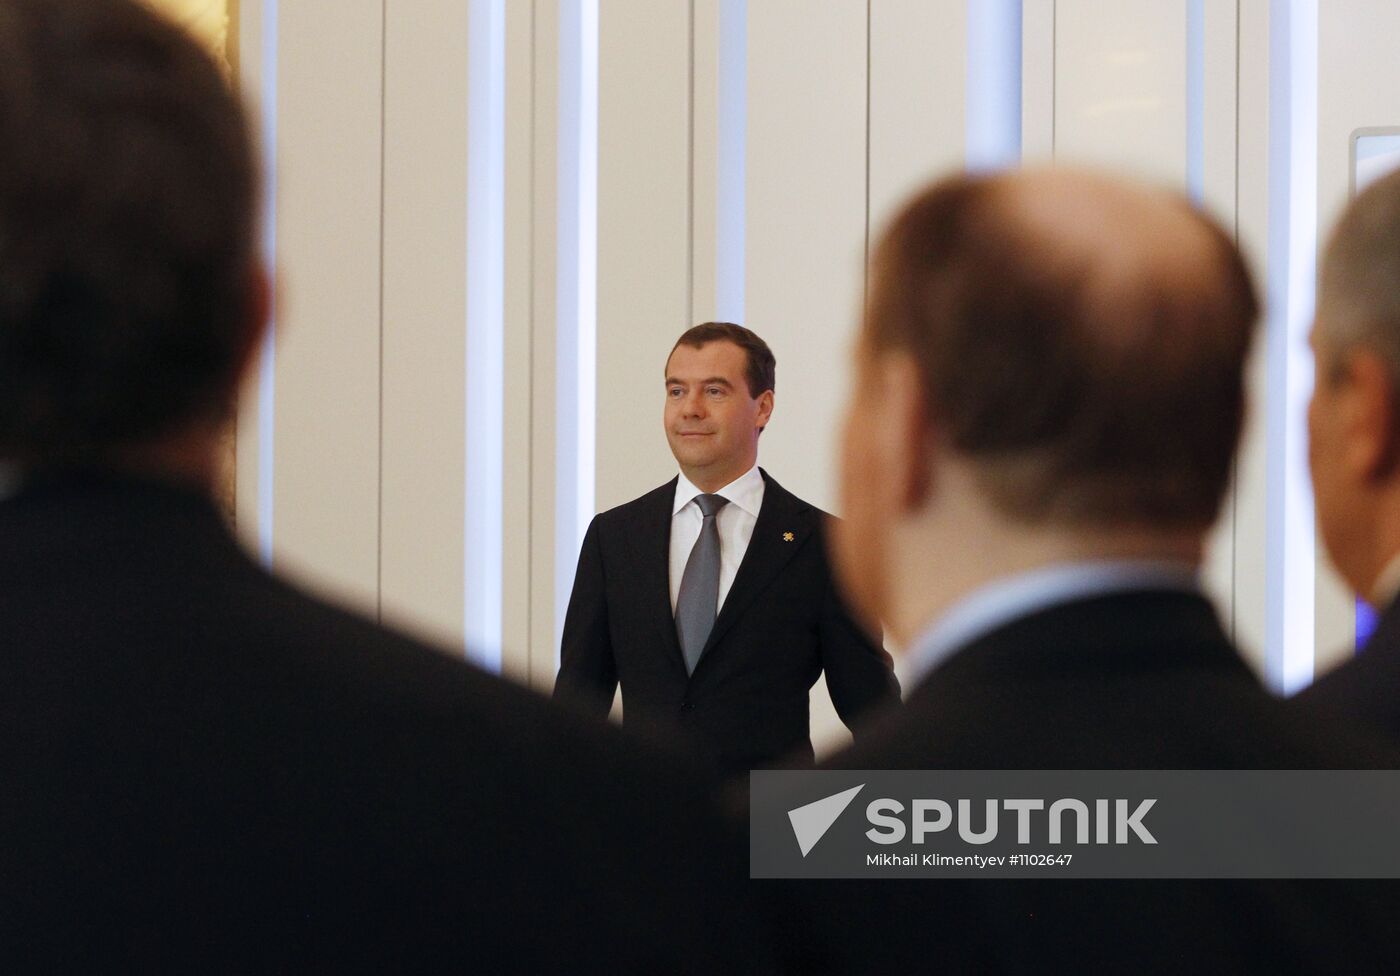 Medvedev chairs extended meeting of State Council in Kremlin